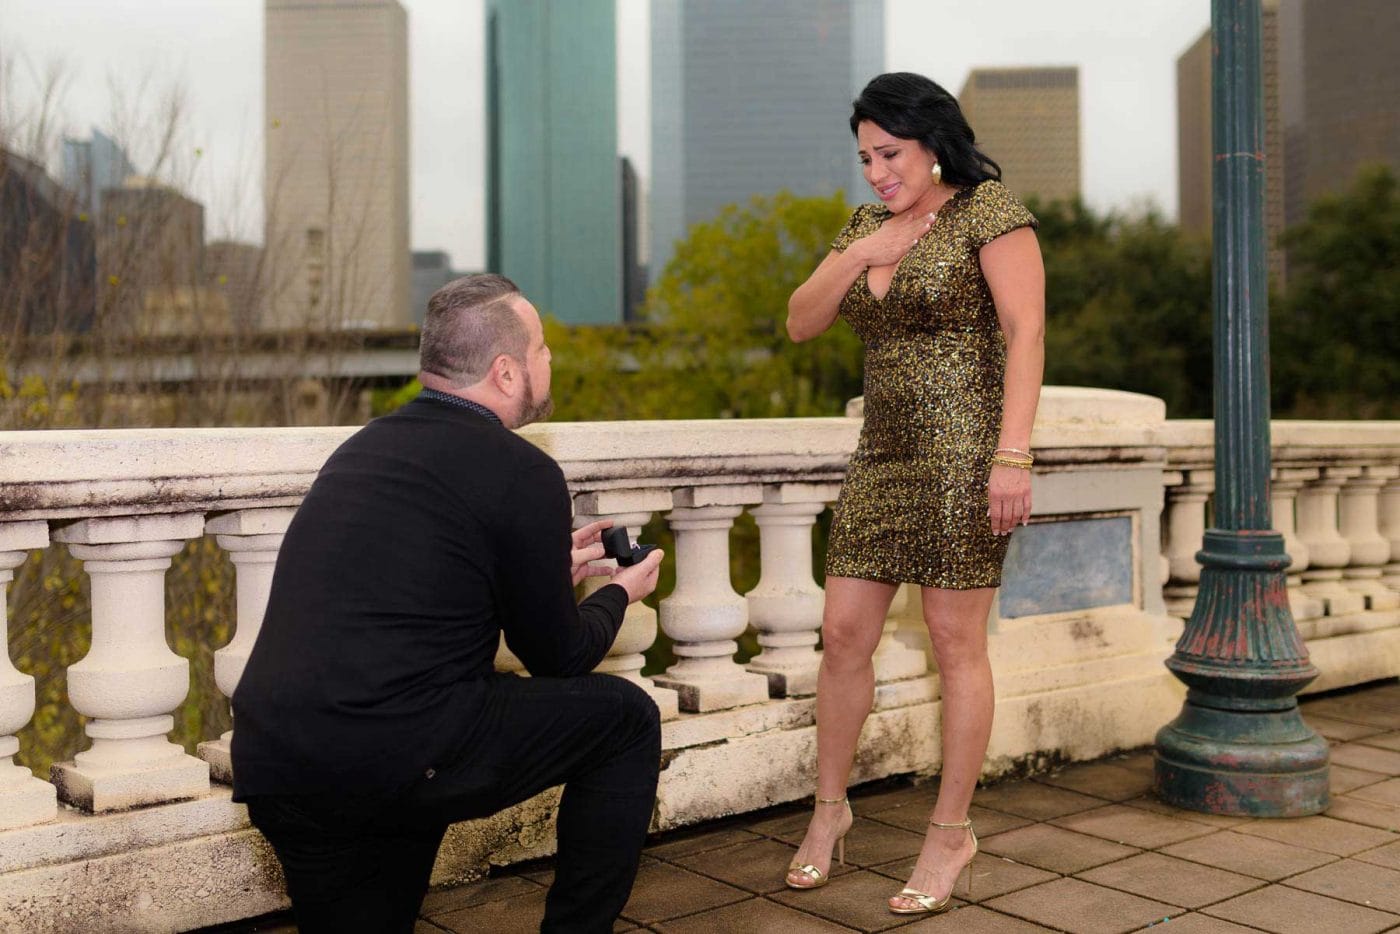 Houston Photographer: A man is romantically proposing to a woman on a beautiful bridge as the skilled photographer captures their special moment.